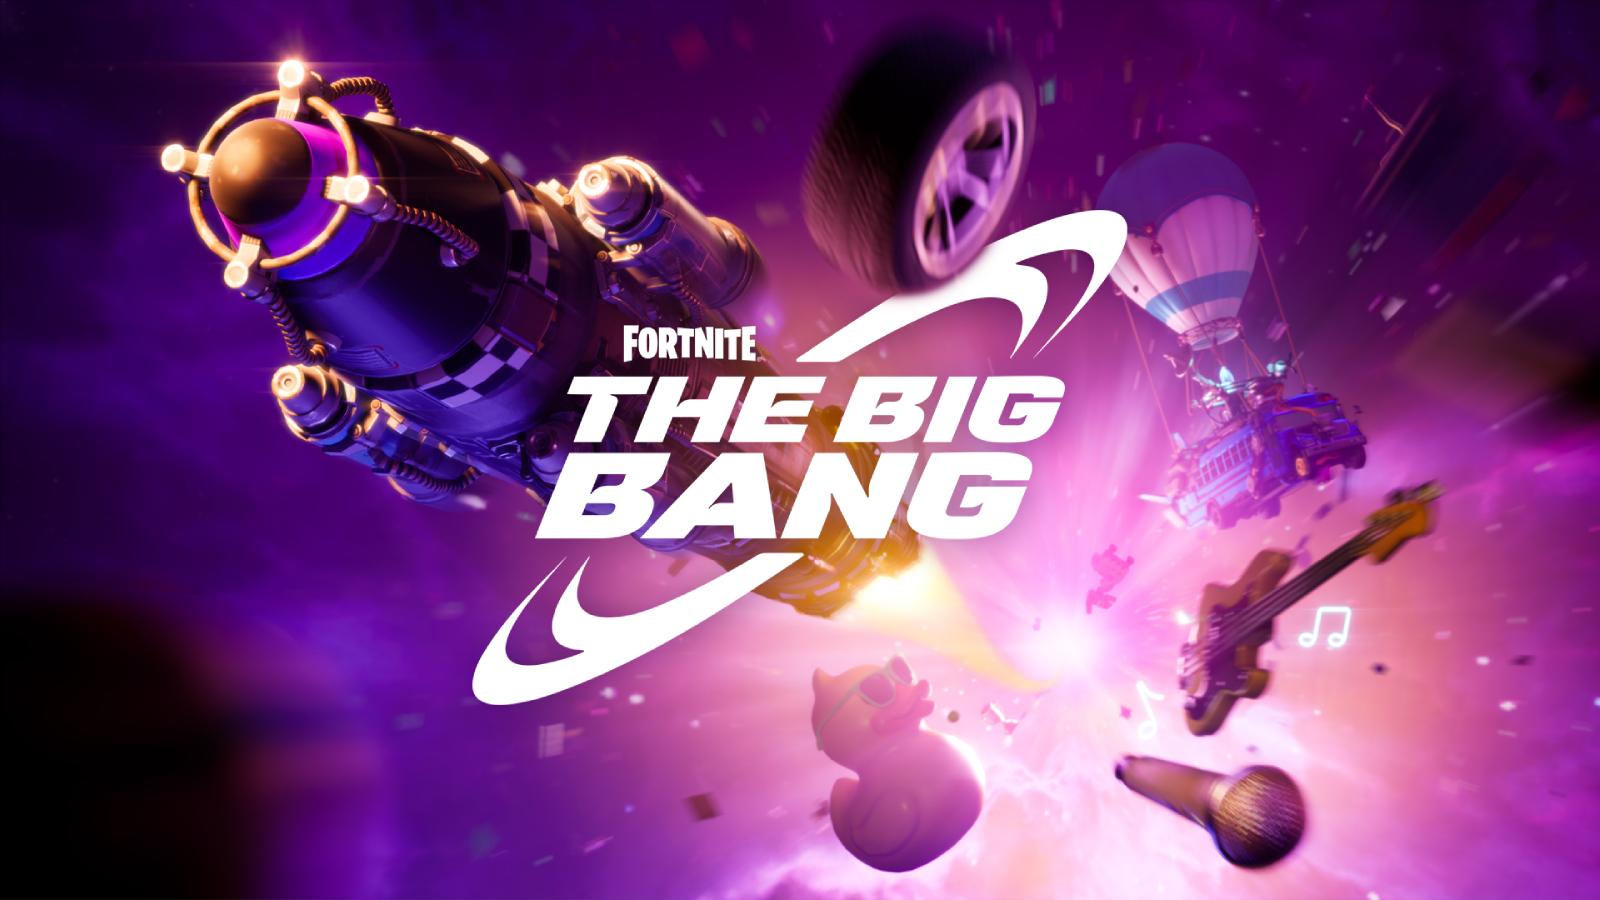 Fortnite Eminem Live event How to join & watch The Big Bang Dexerto